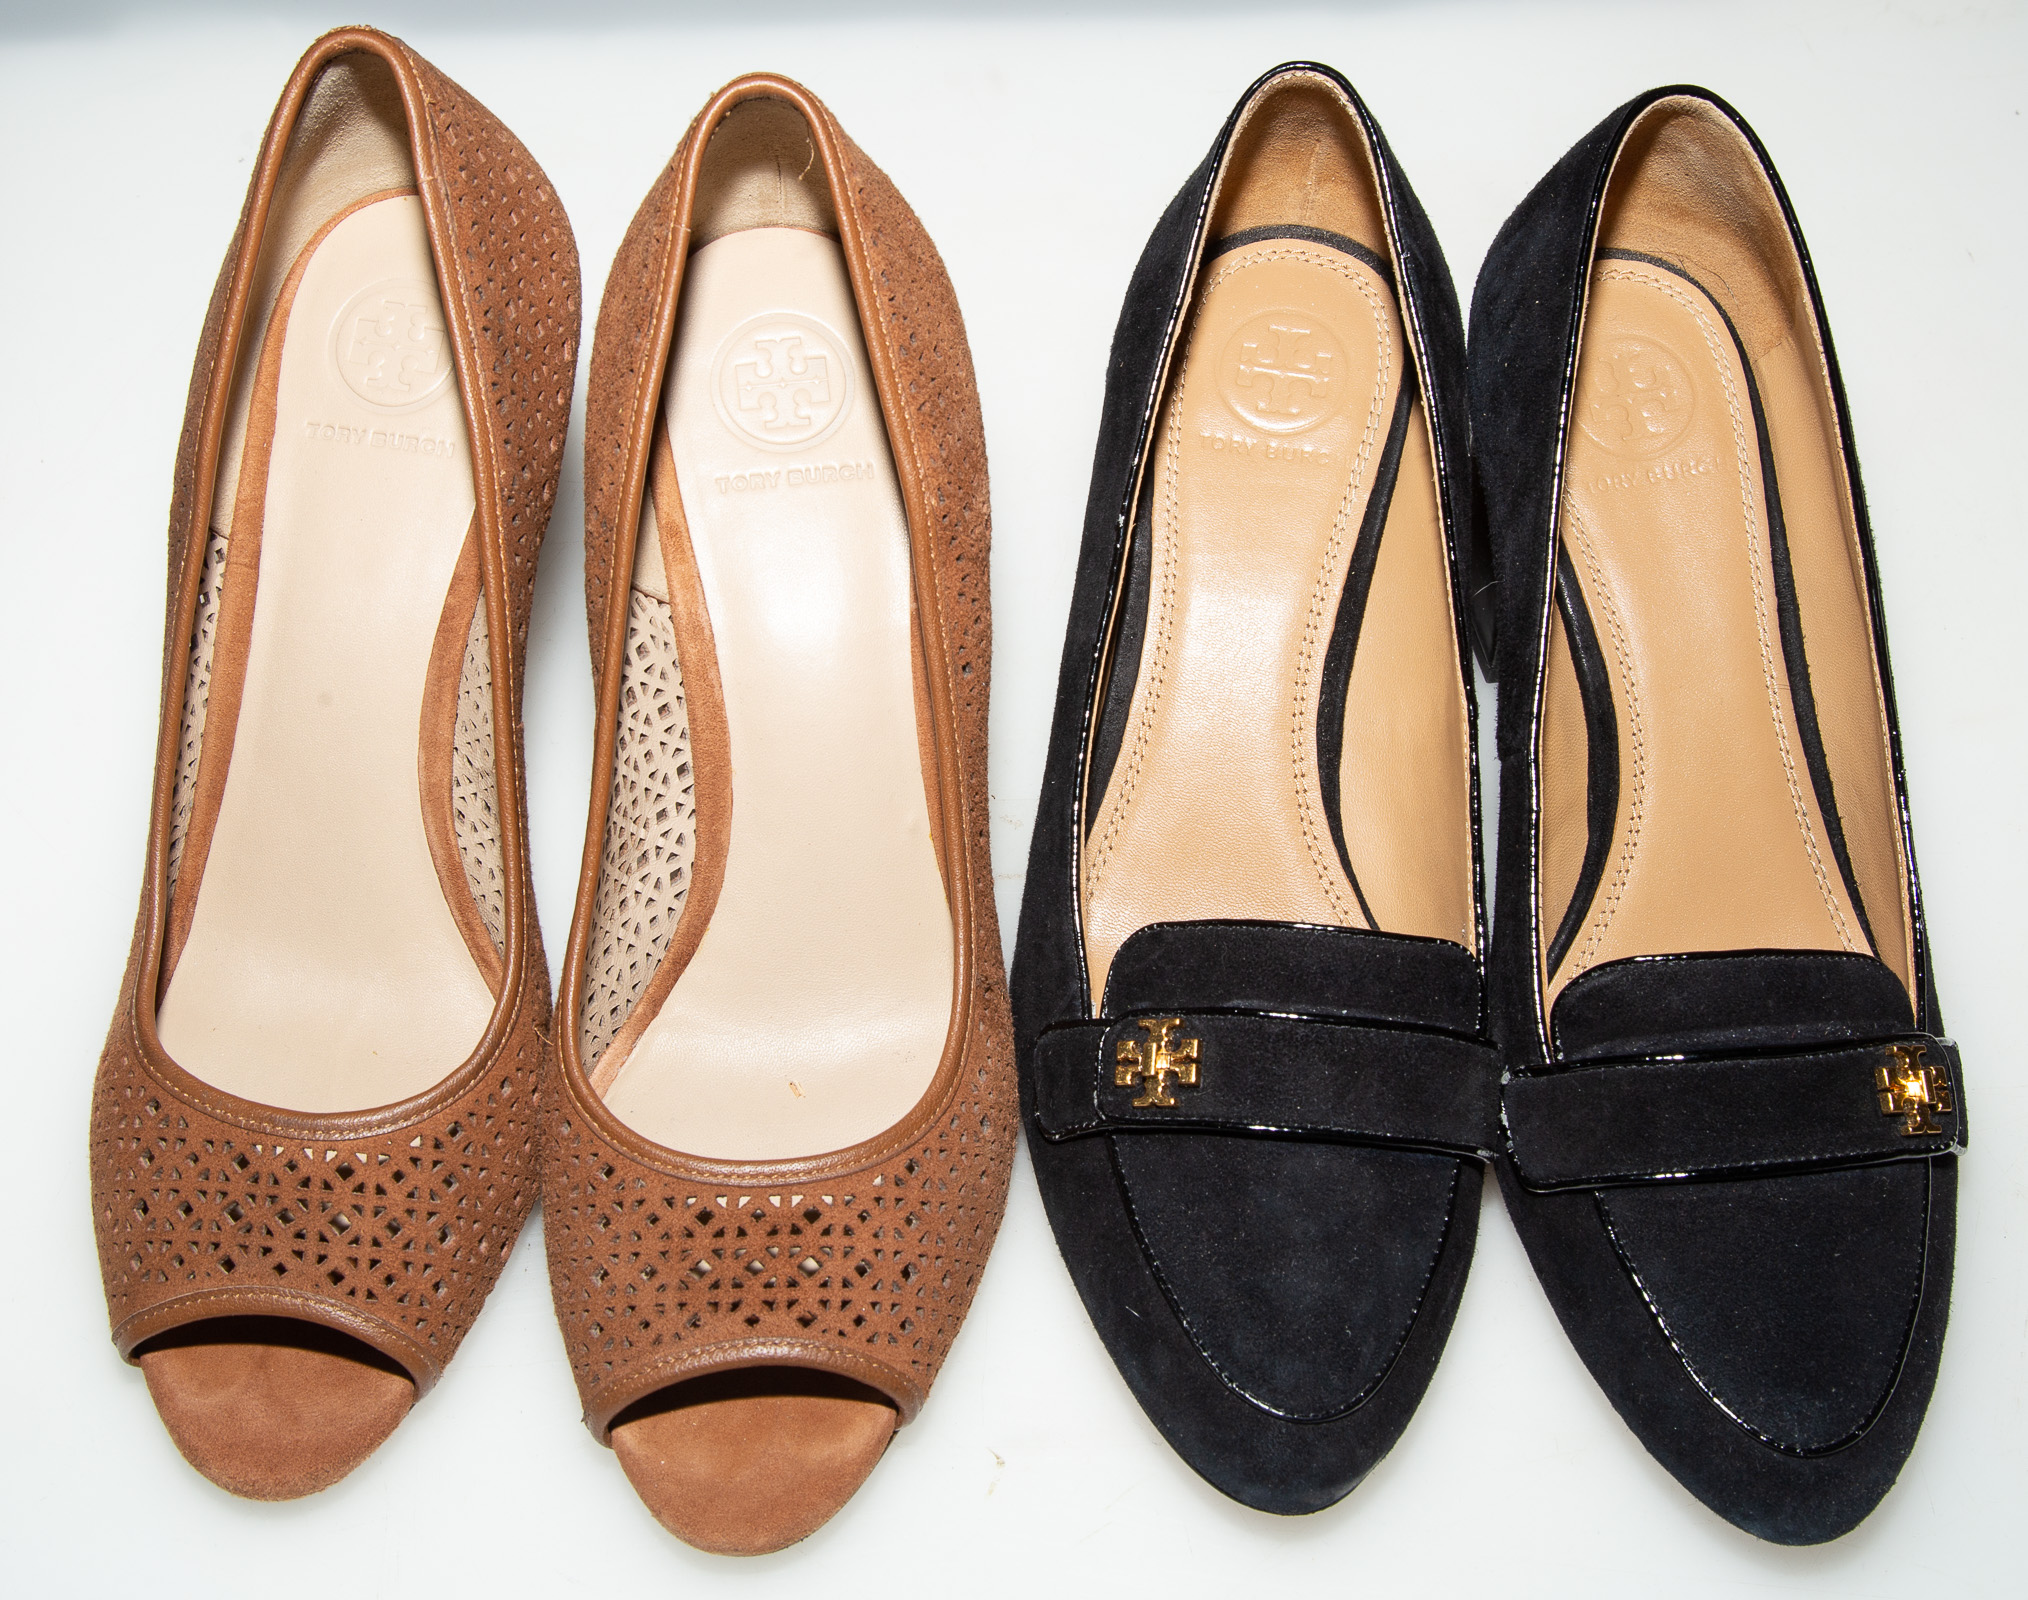 TWO PAIRS TORY BURCH SHOES both 3370b8